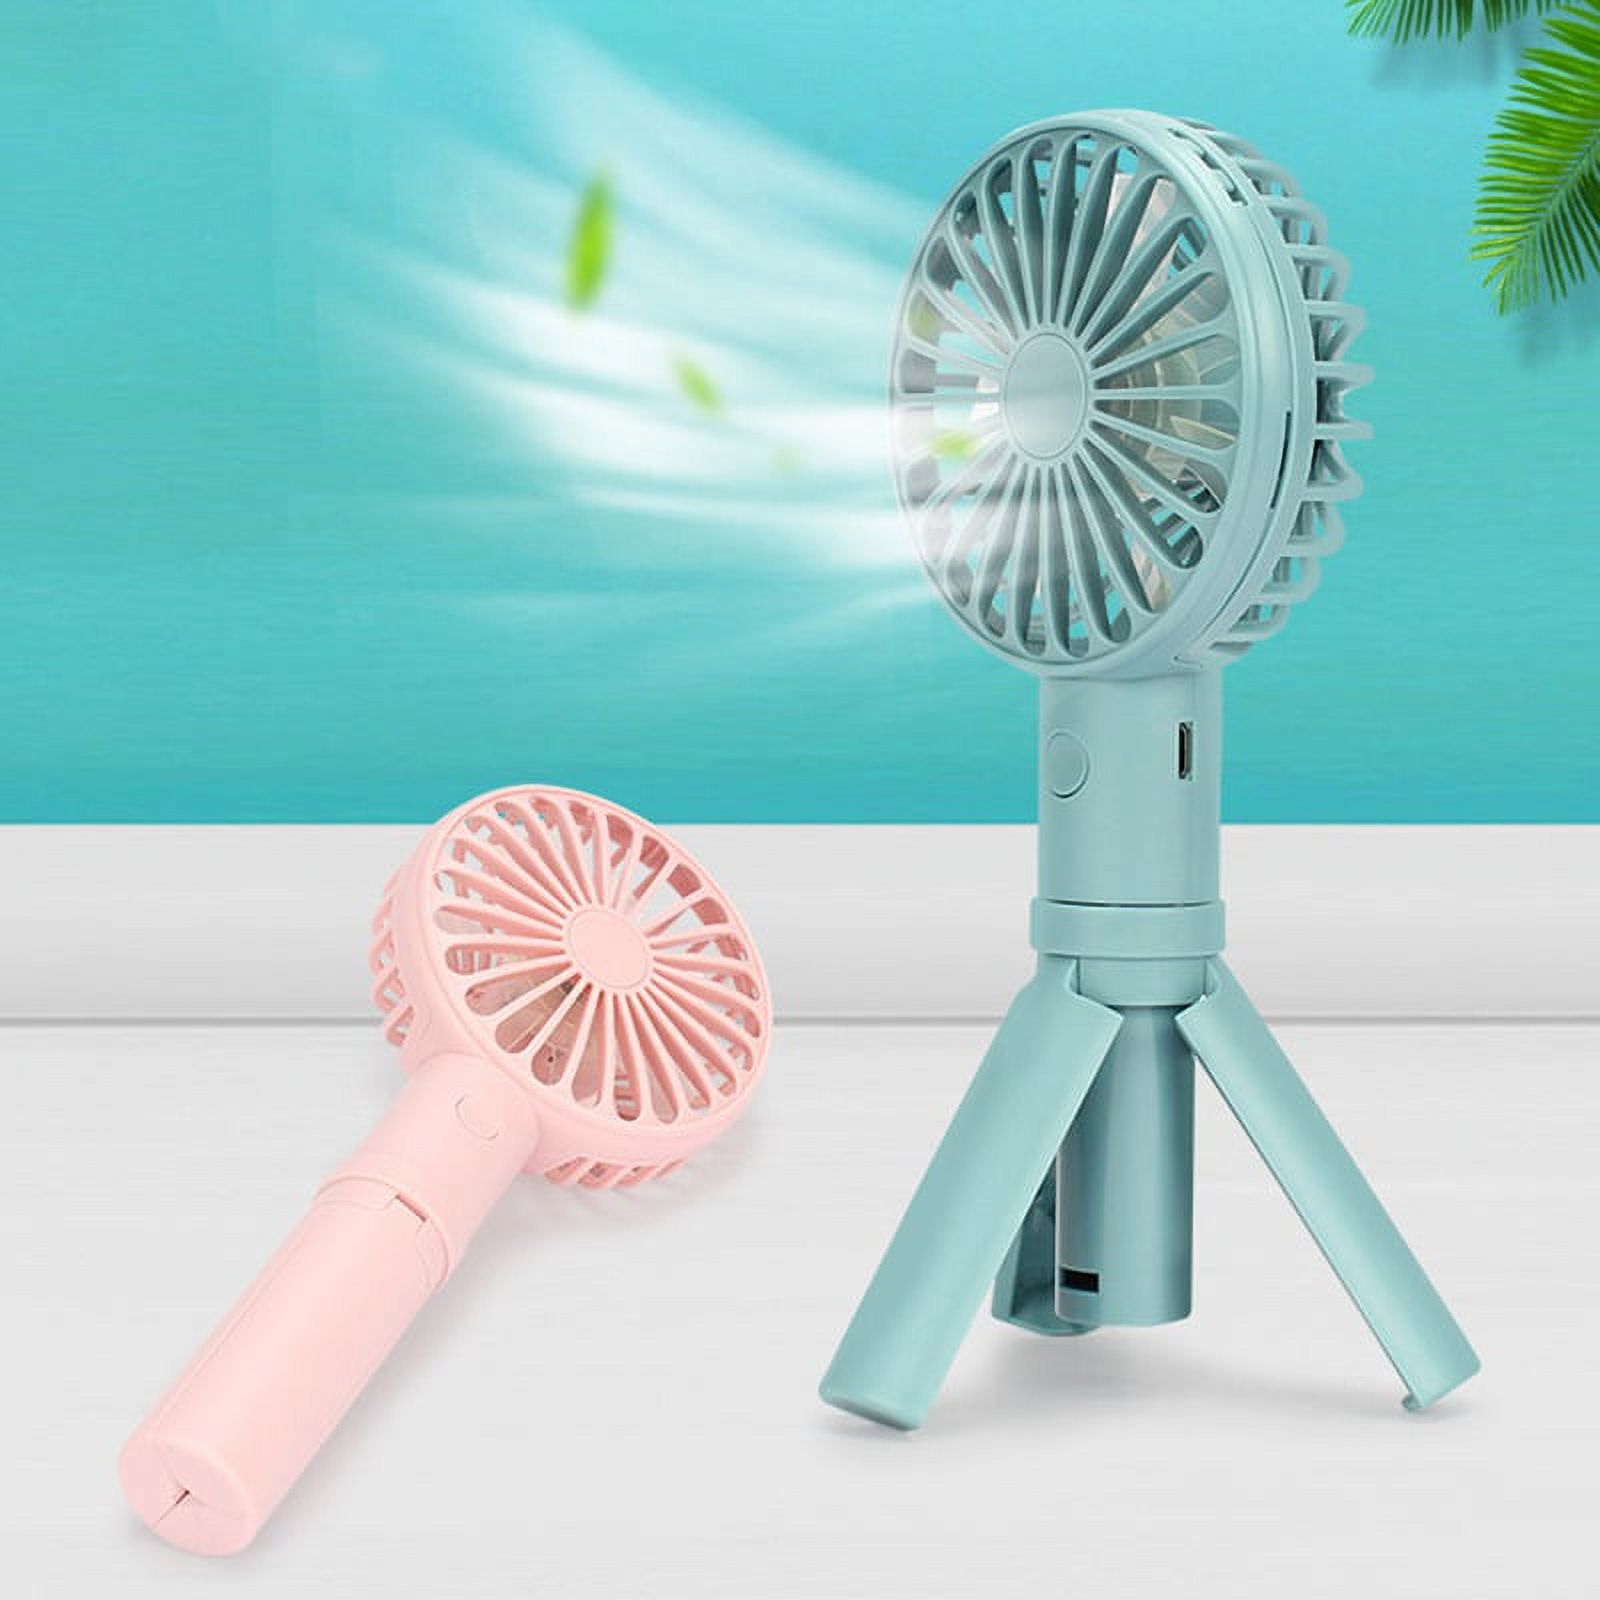 Handheld Portable Fan Mini Hand Fan, USB Rechargeable Personal Fan, Small Fan with 3 Speeds for Travel/Commute/Makeup(1 pack) - image 5 of 6